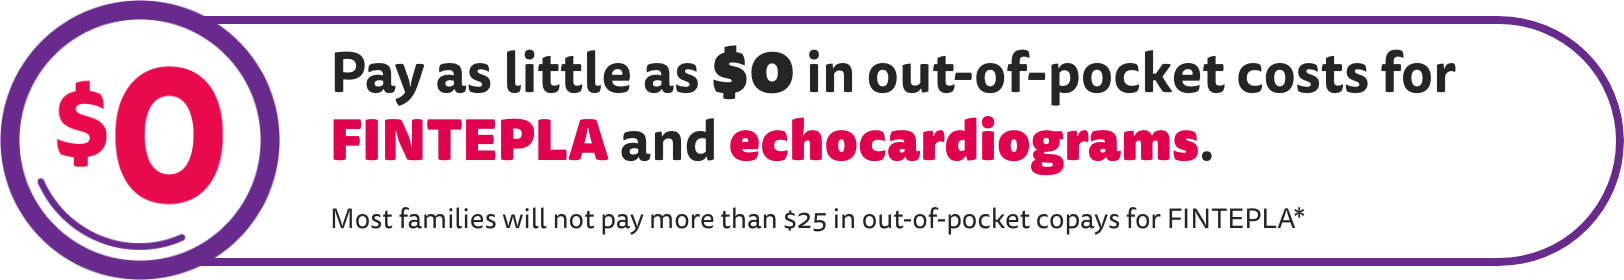 Pay as little as $0 in out-of-pocket costs for FINTEPLA and echocardiograms